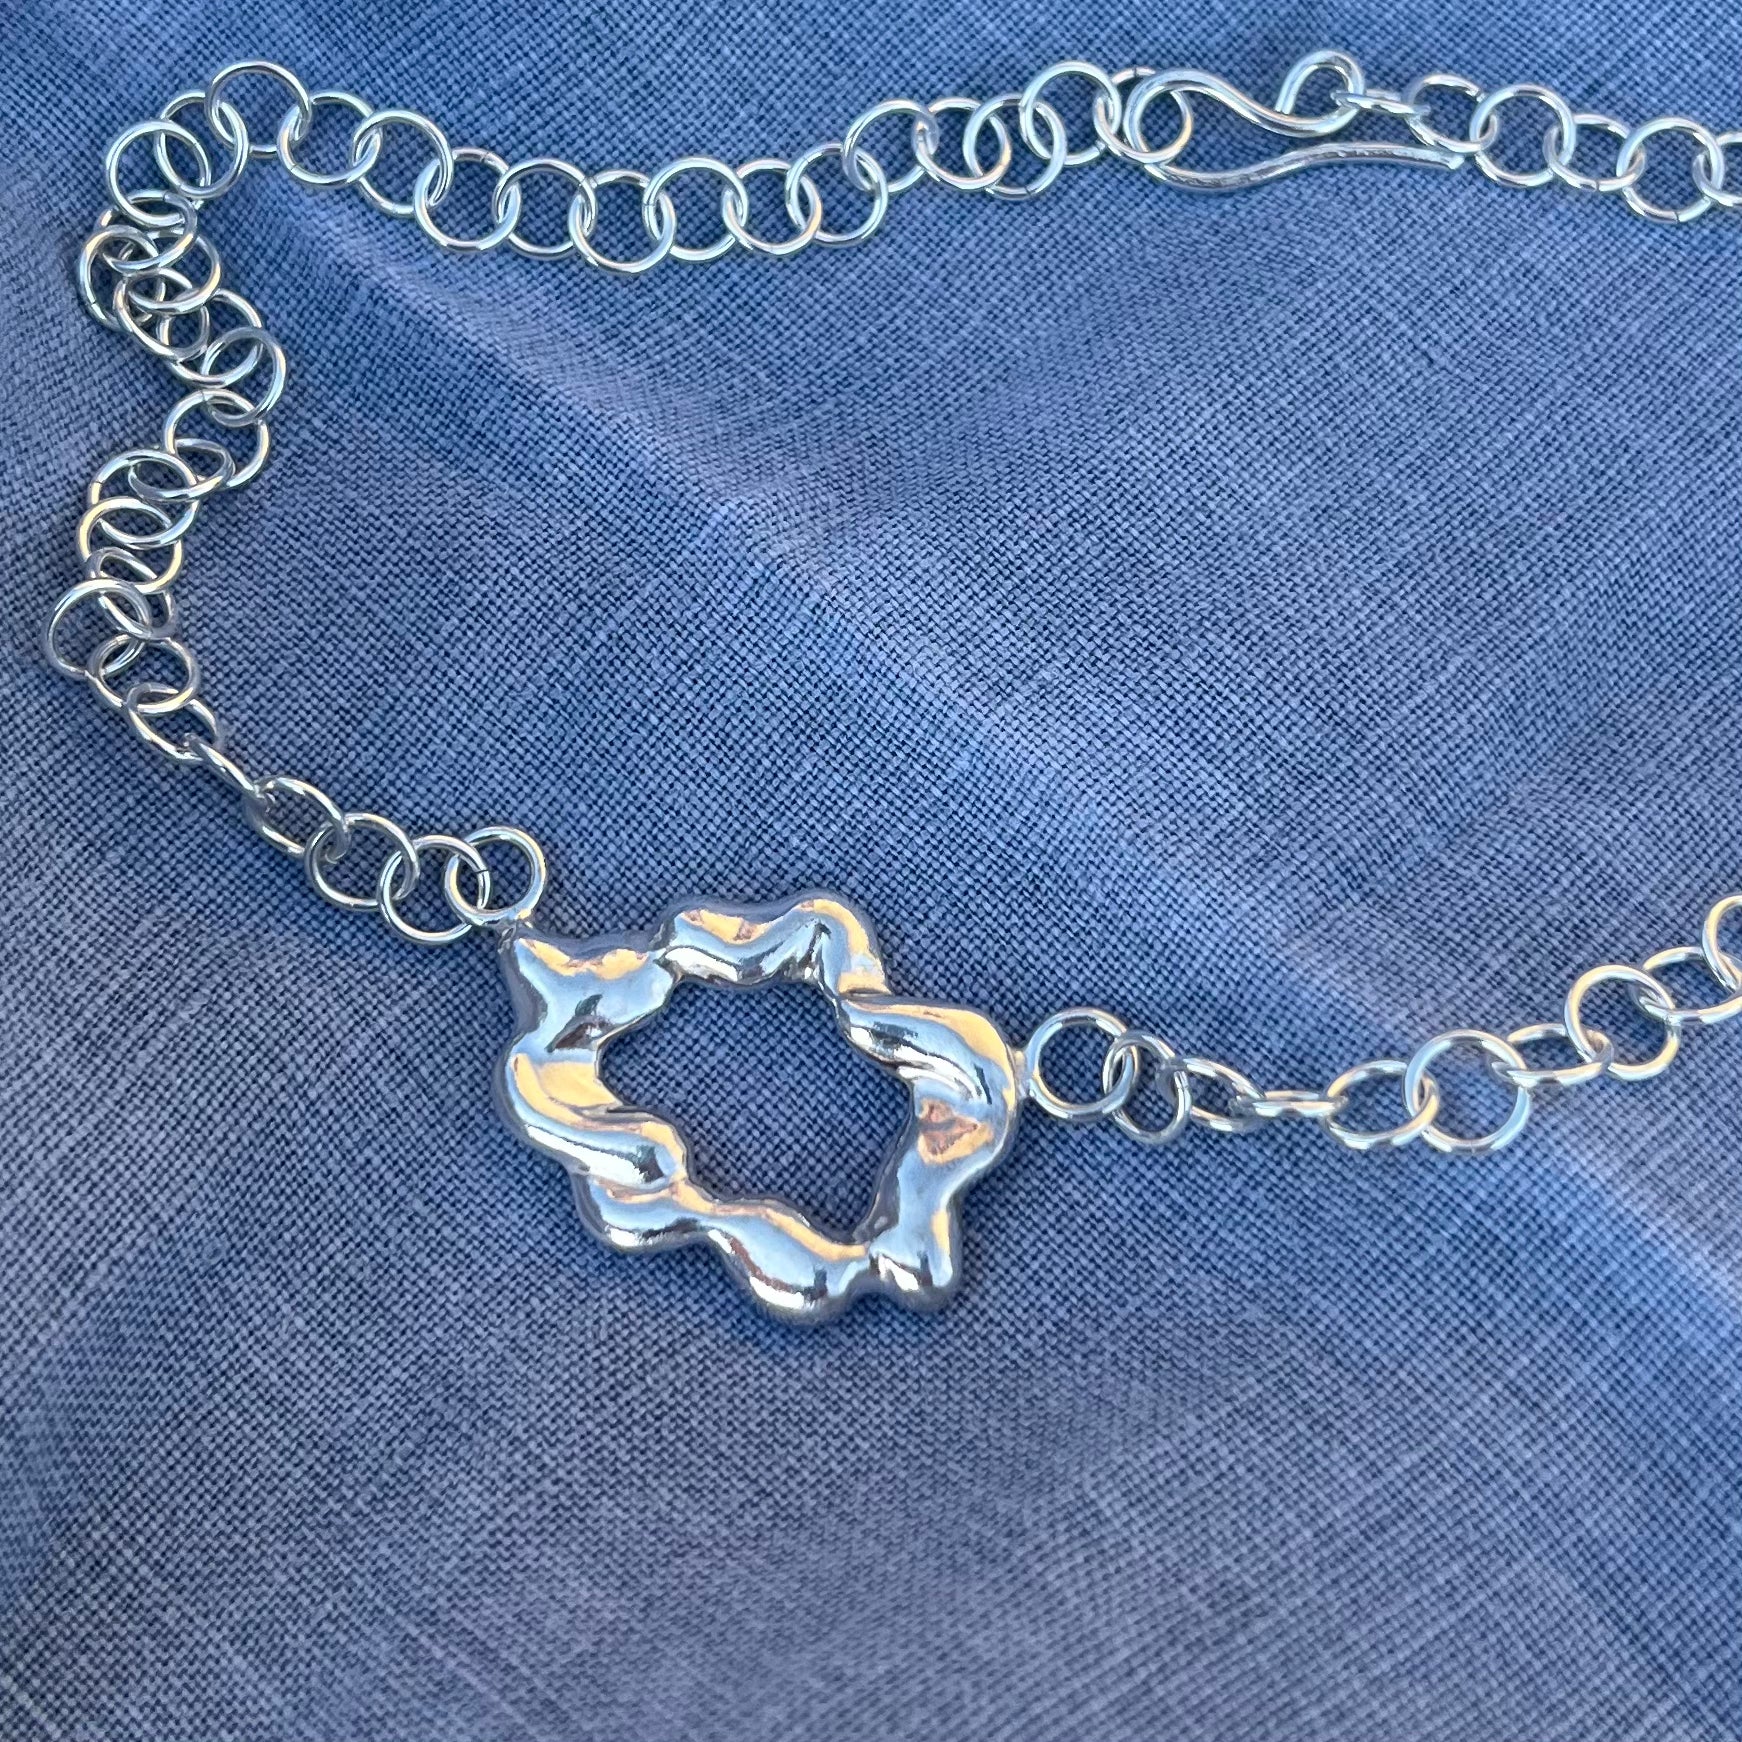 A zoomed in photograph of a chunky, statement handmade sterling silver bracelet on a blue linen background. The centrepiece of the bracelet is shaped like a cloud and it has a handmade hook clasp.